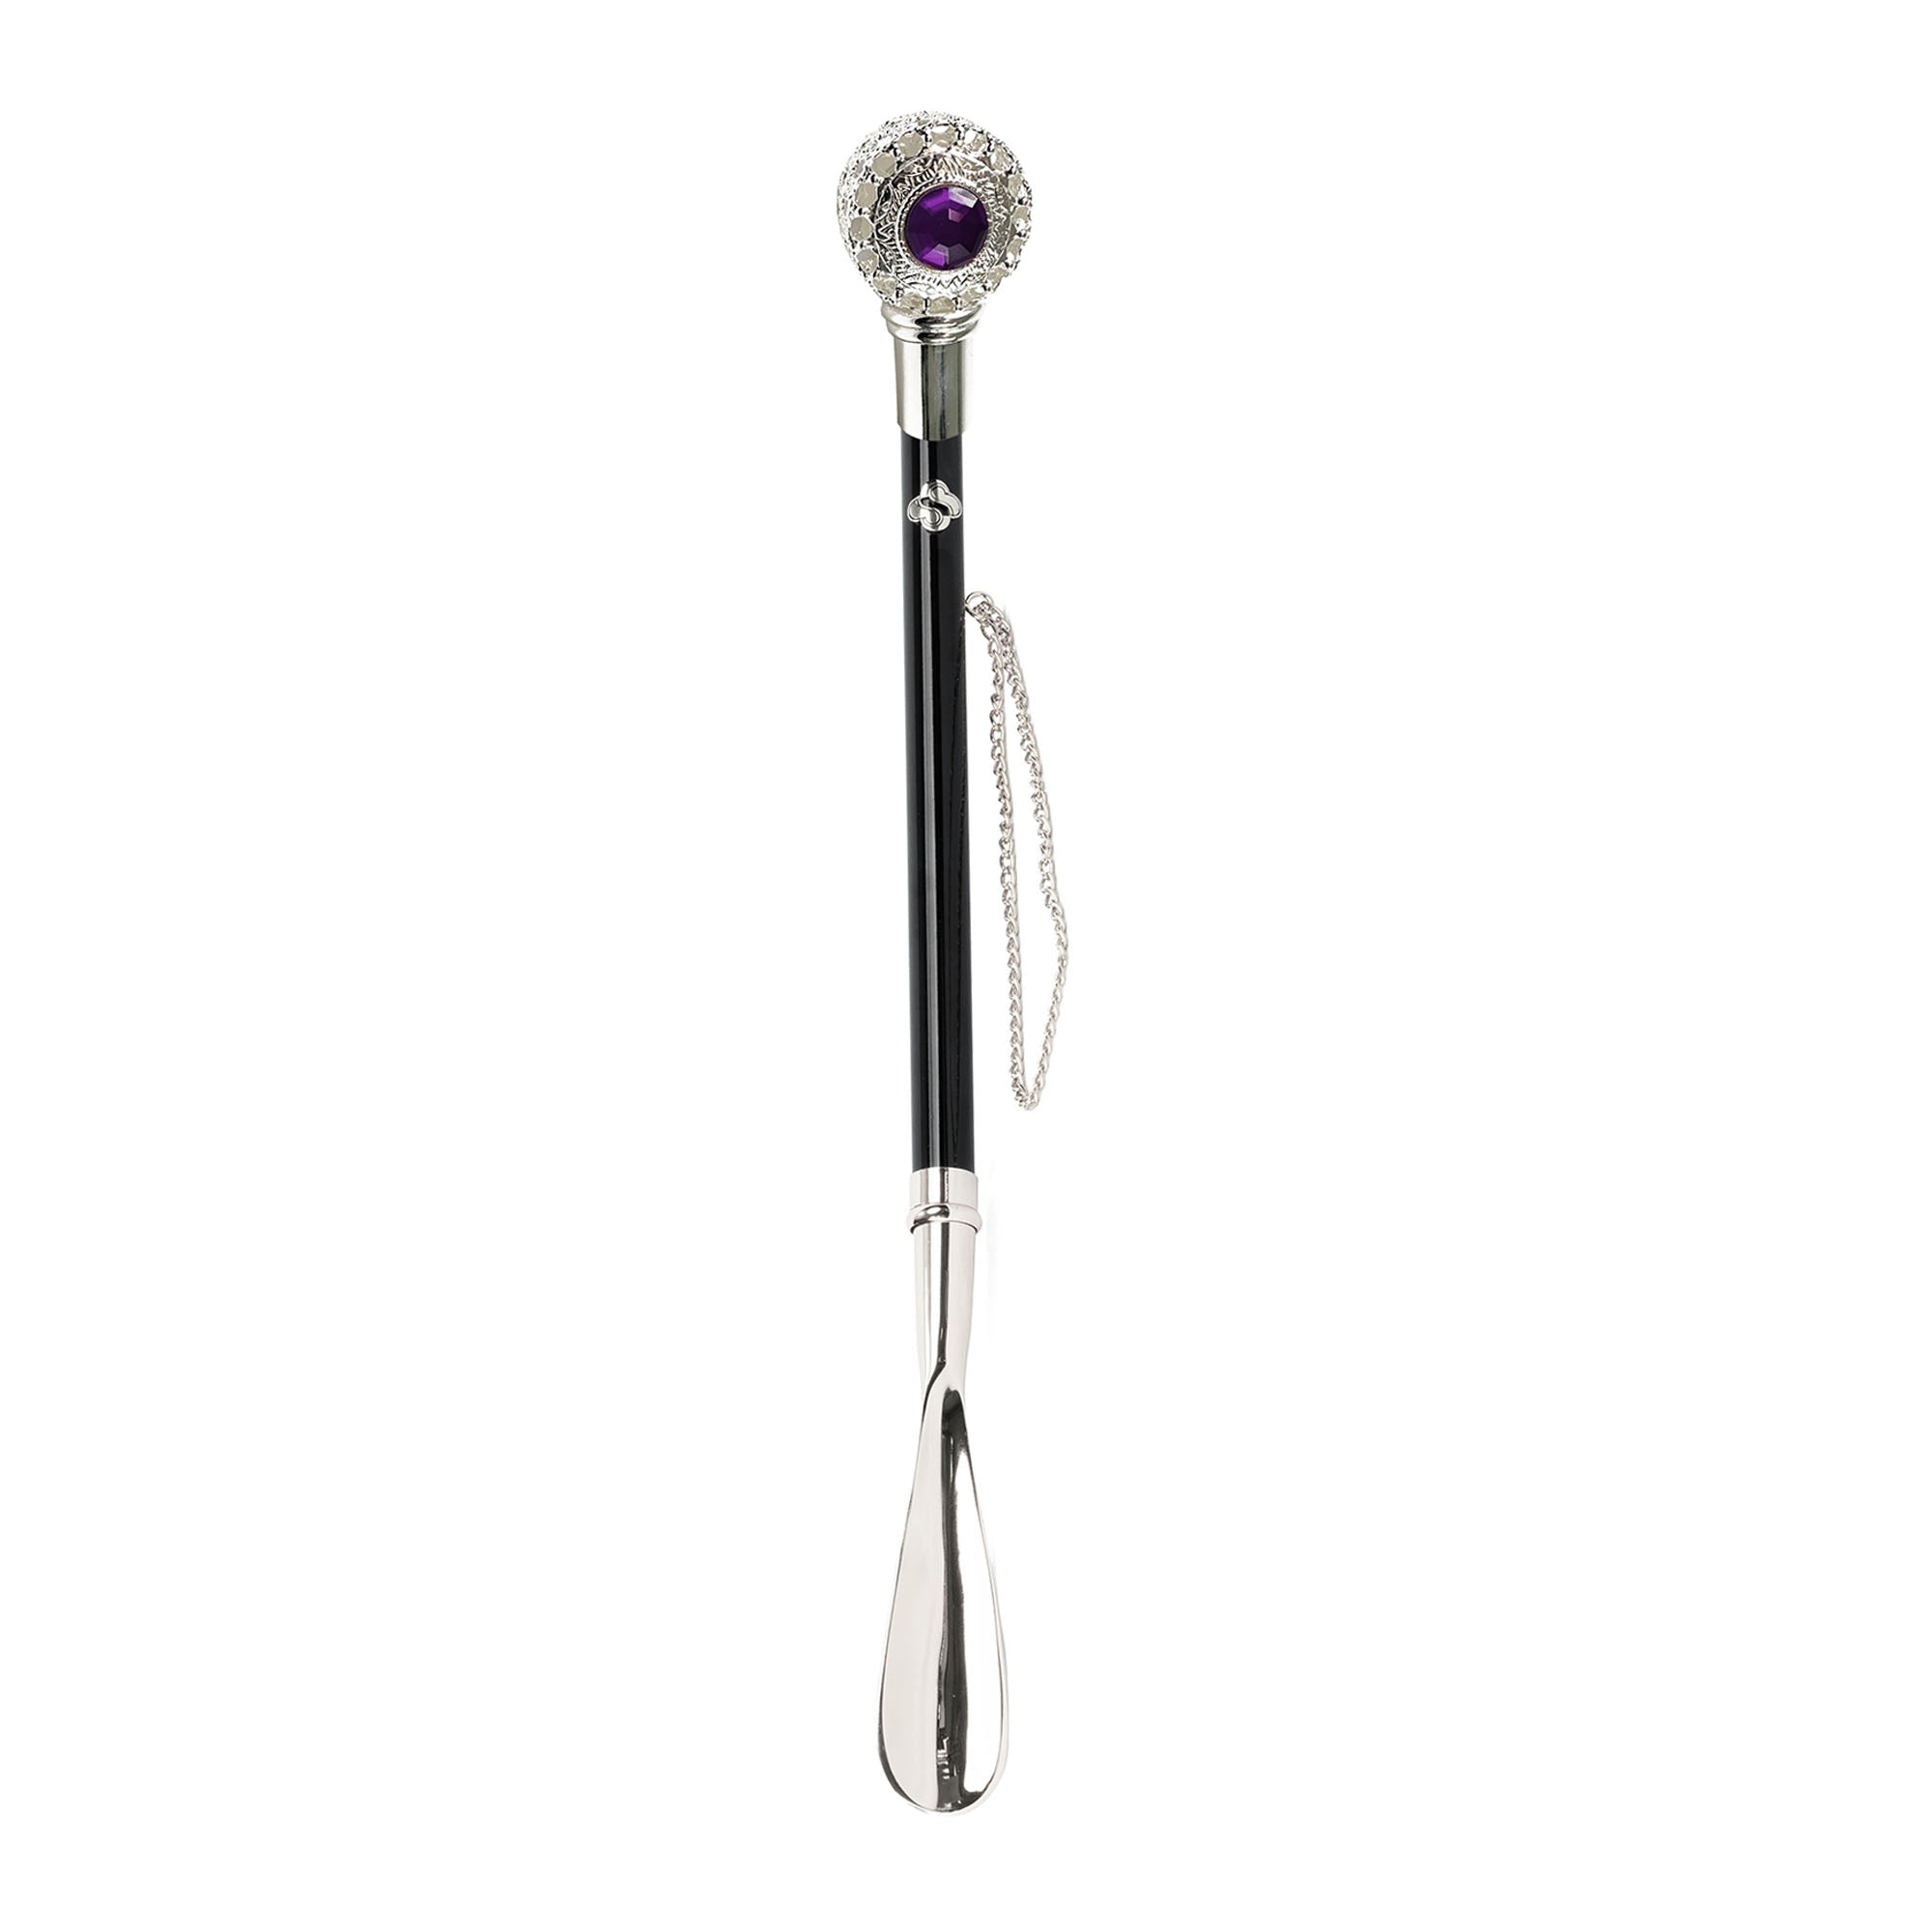 Luxury Shoehorn with Amethyst crystals